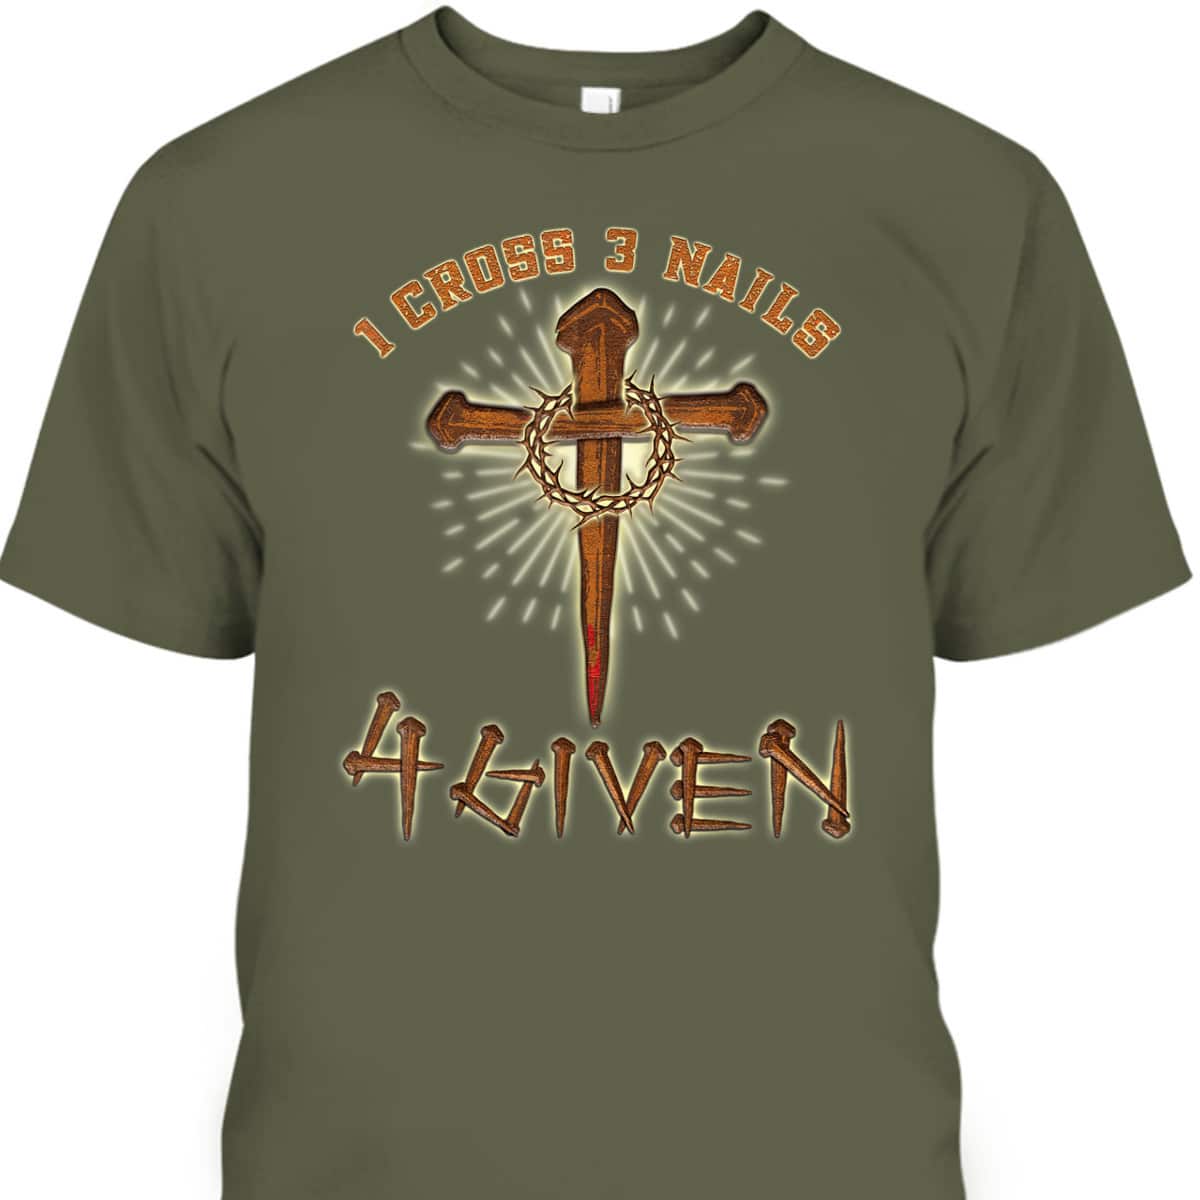 Easter Jesus 1 Cross 3 Nails 4 Given Religious Christian T-Shirt